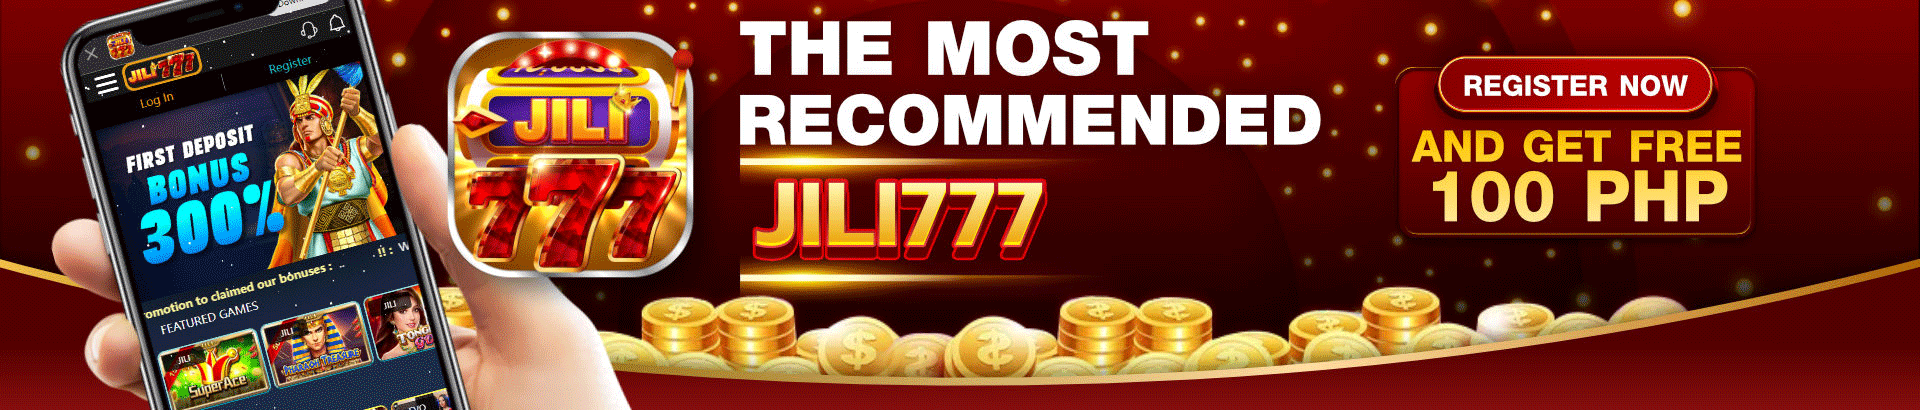 MNL777 Most Recommended